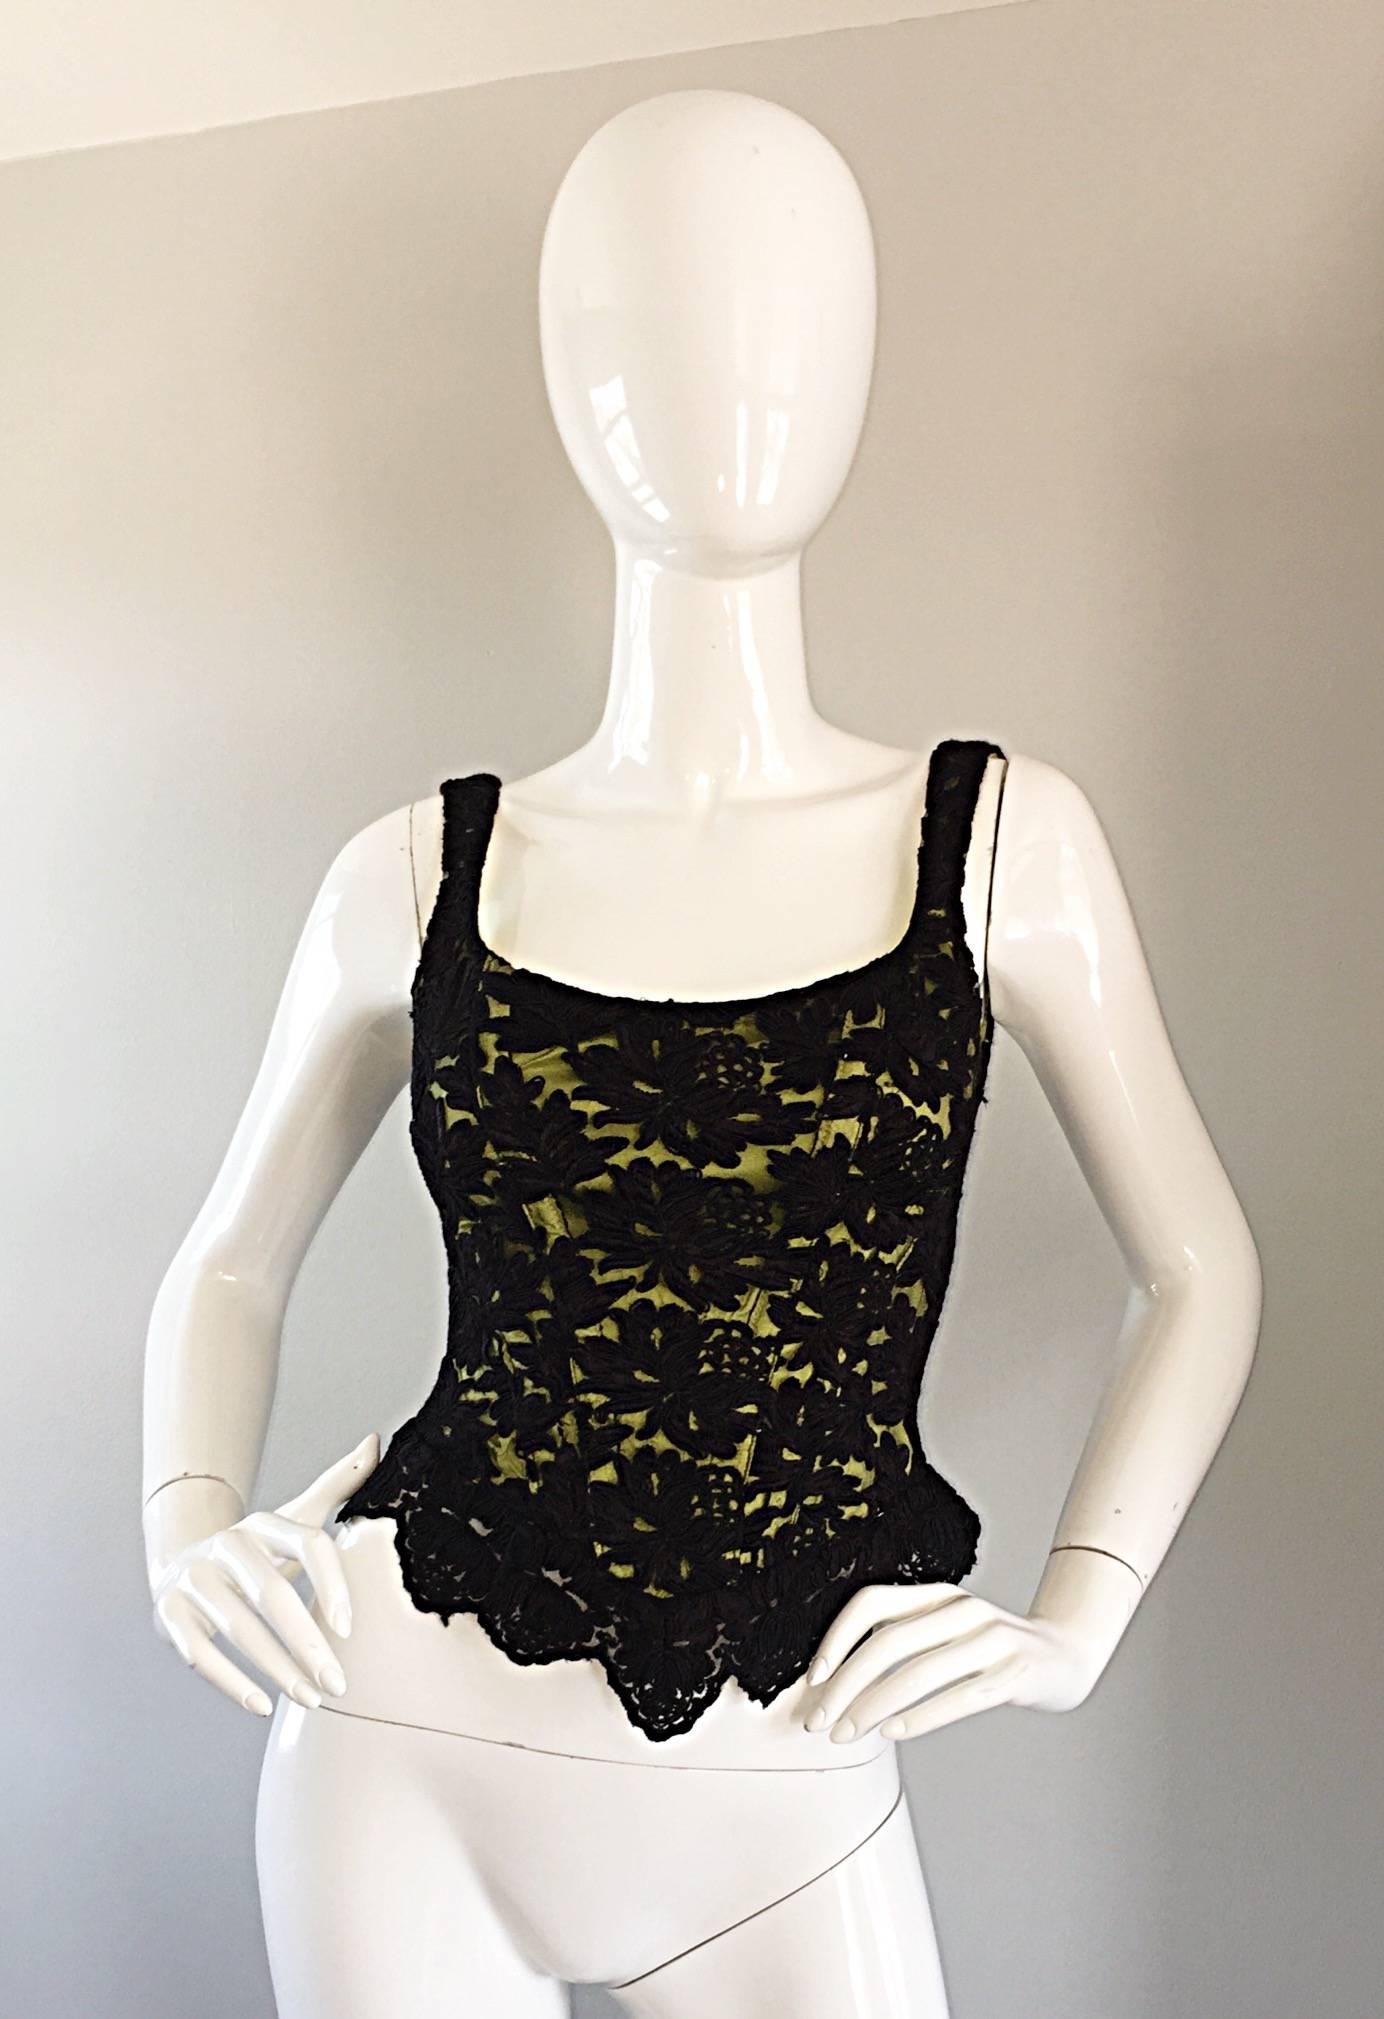 Sexy 1990s GIGI CLARK for LILLIE RUBIN black and chartreuse lace bustier/corset top! Brand new with original tags from Lillie Rubin still attached.  Chartreuse green silk, with a hand-sewn black lace overlay. Hook-and-eye closures up the entire